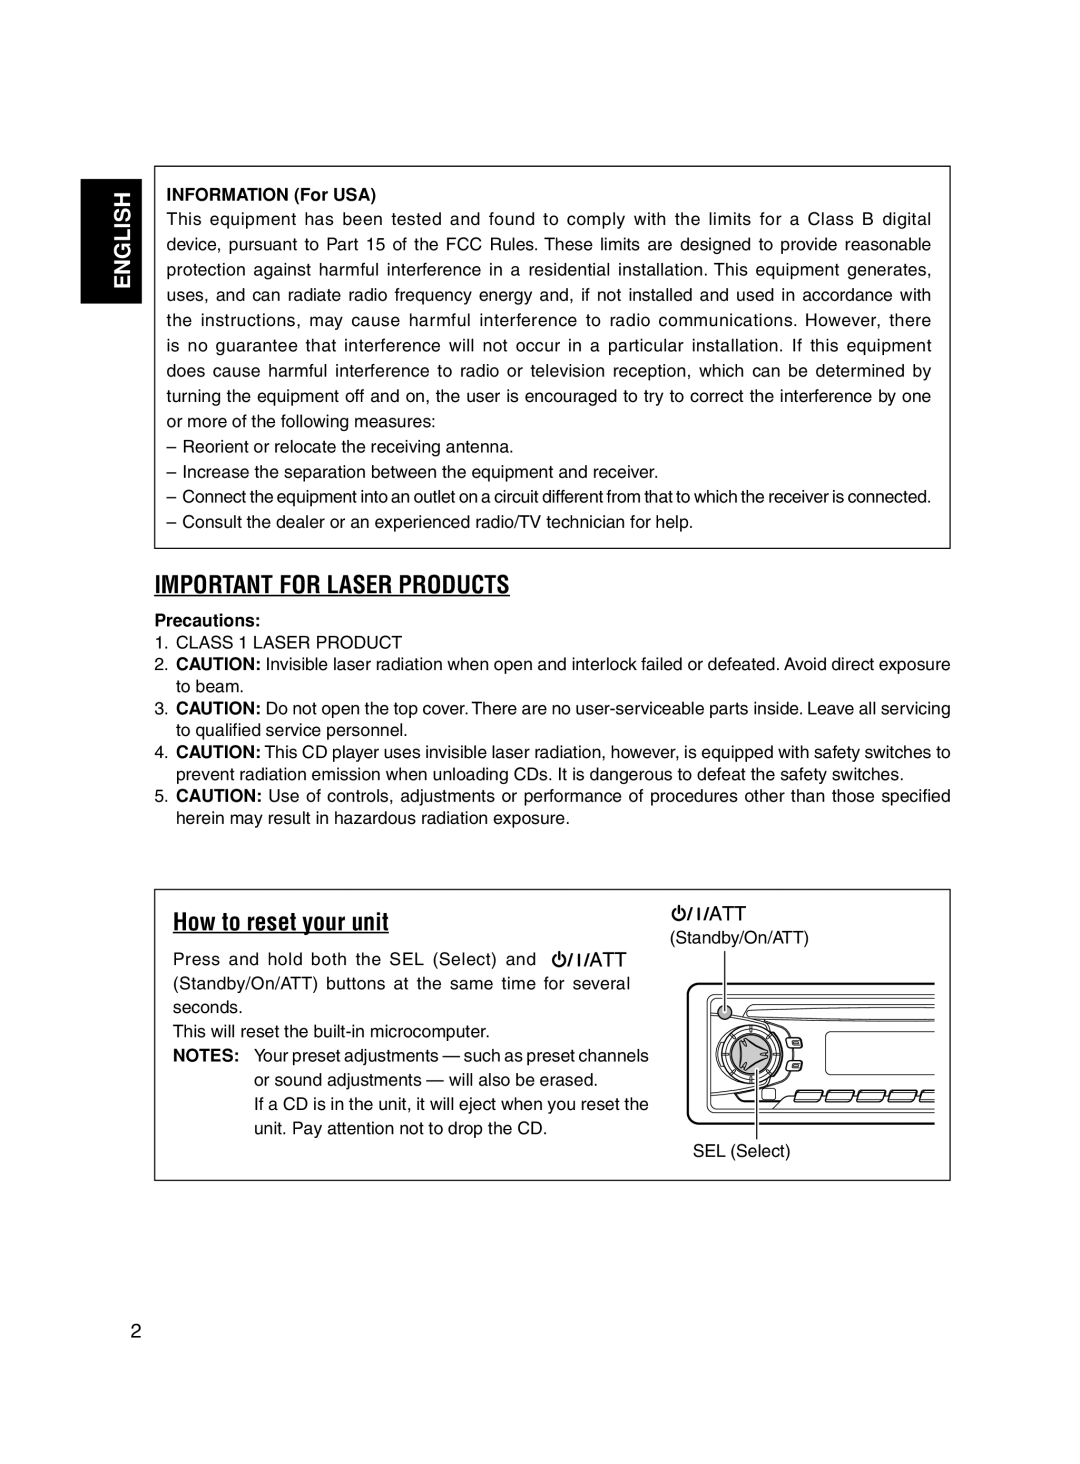 JVC KD-S7250 manual Important For Laser Products, How to reset your unit, English, INFORMATION For USA, Precautions 